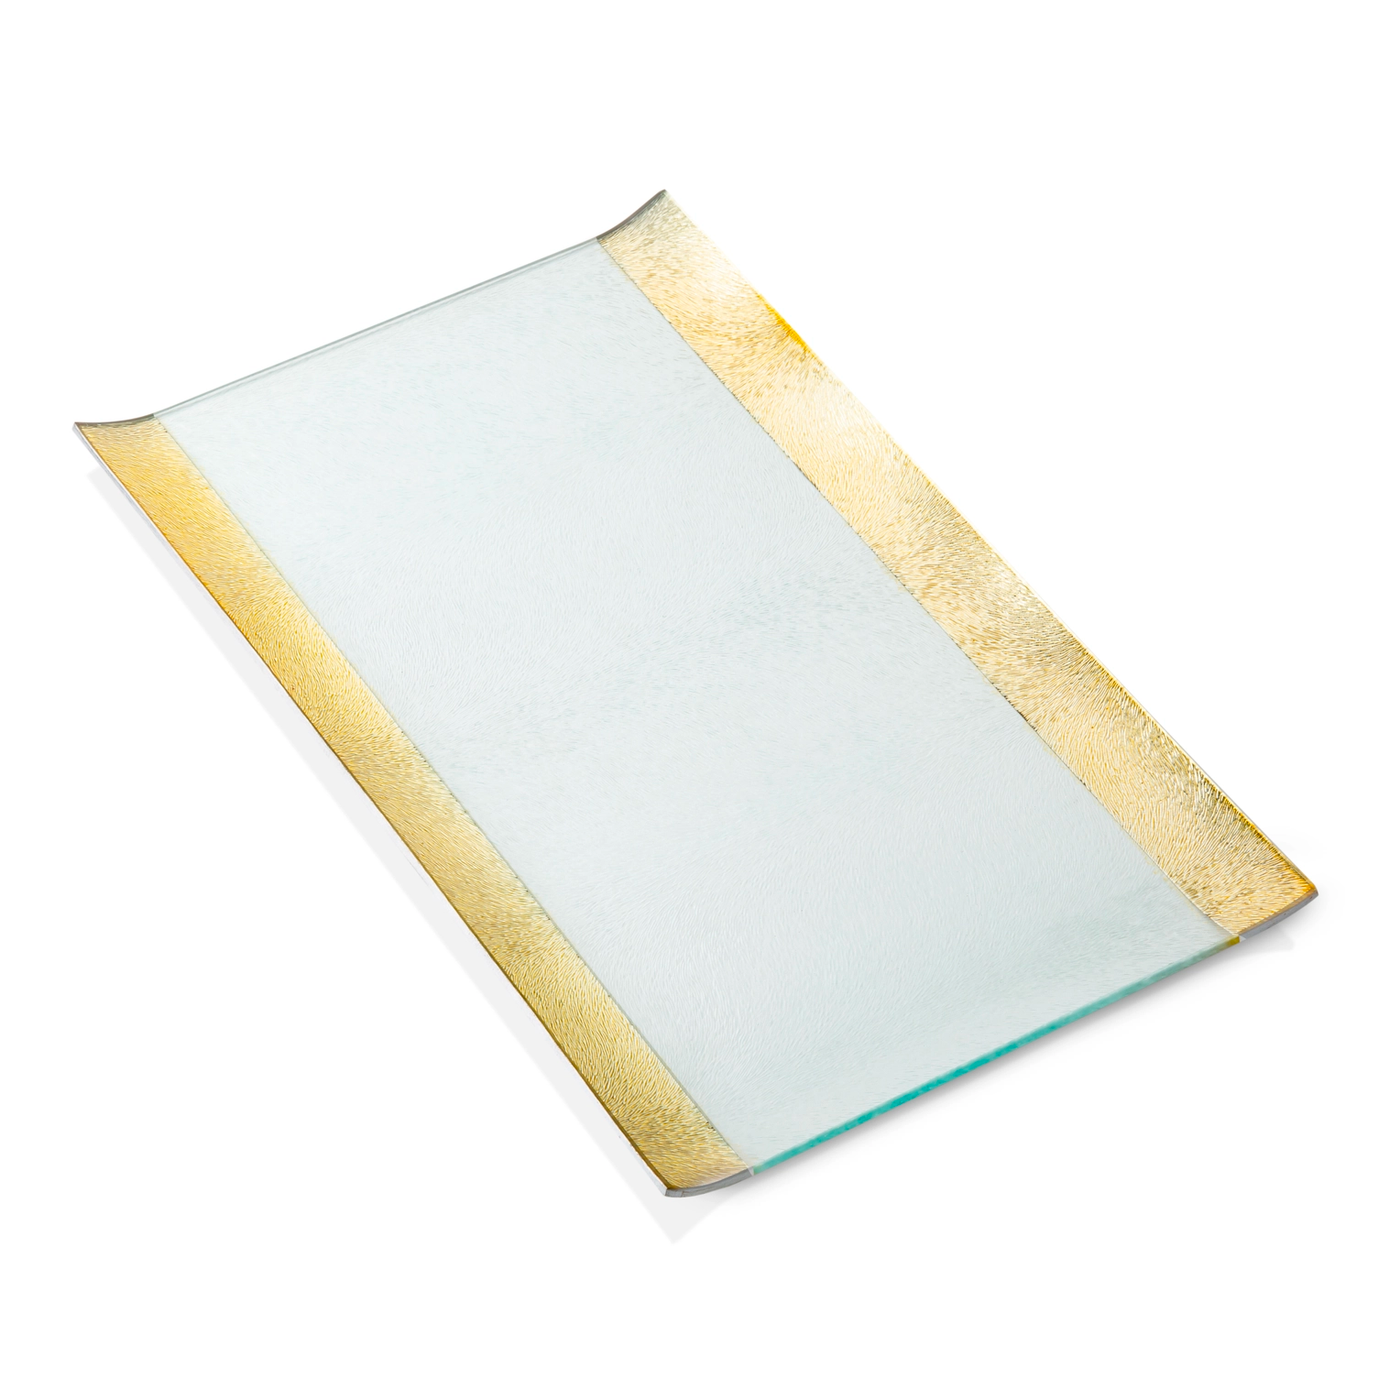 Glass Tray With Gold Border (1 Count)